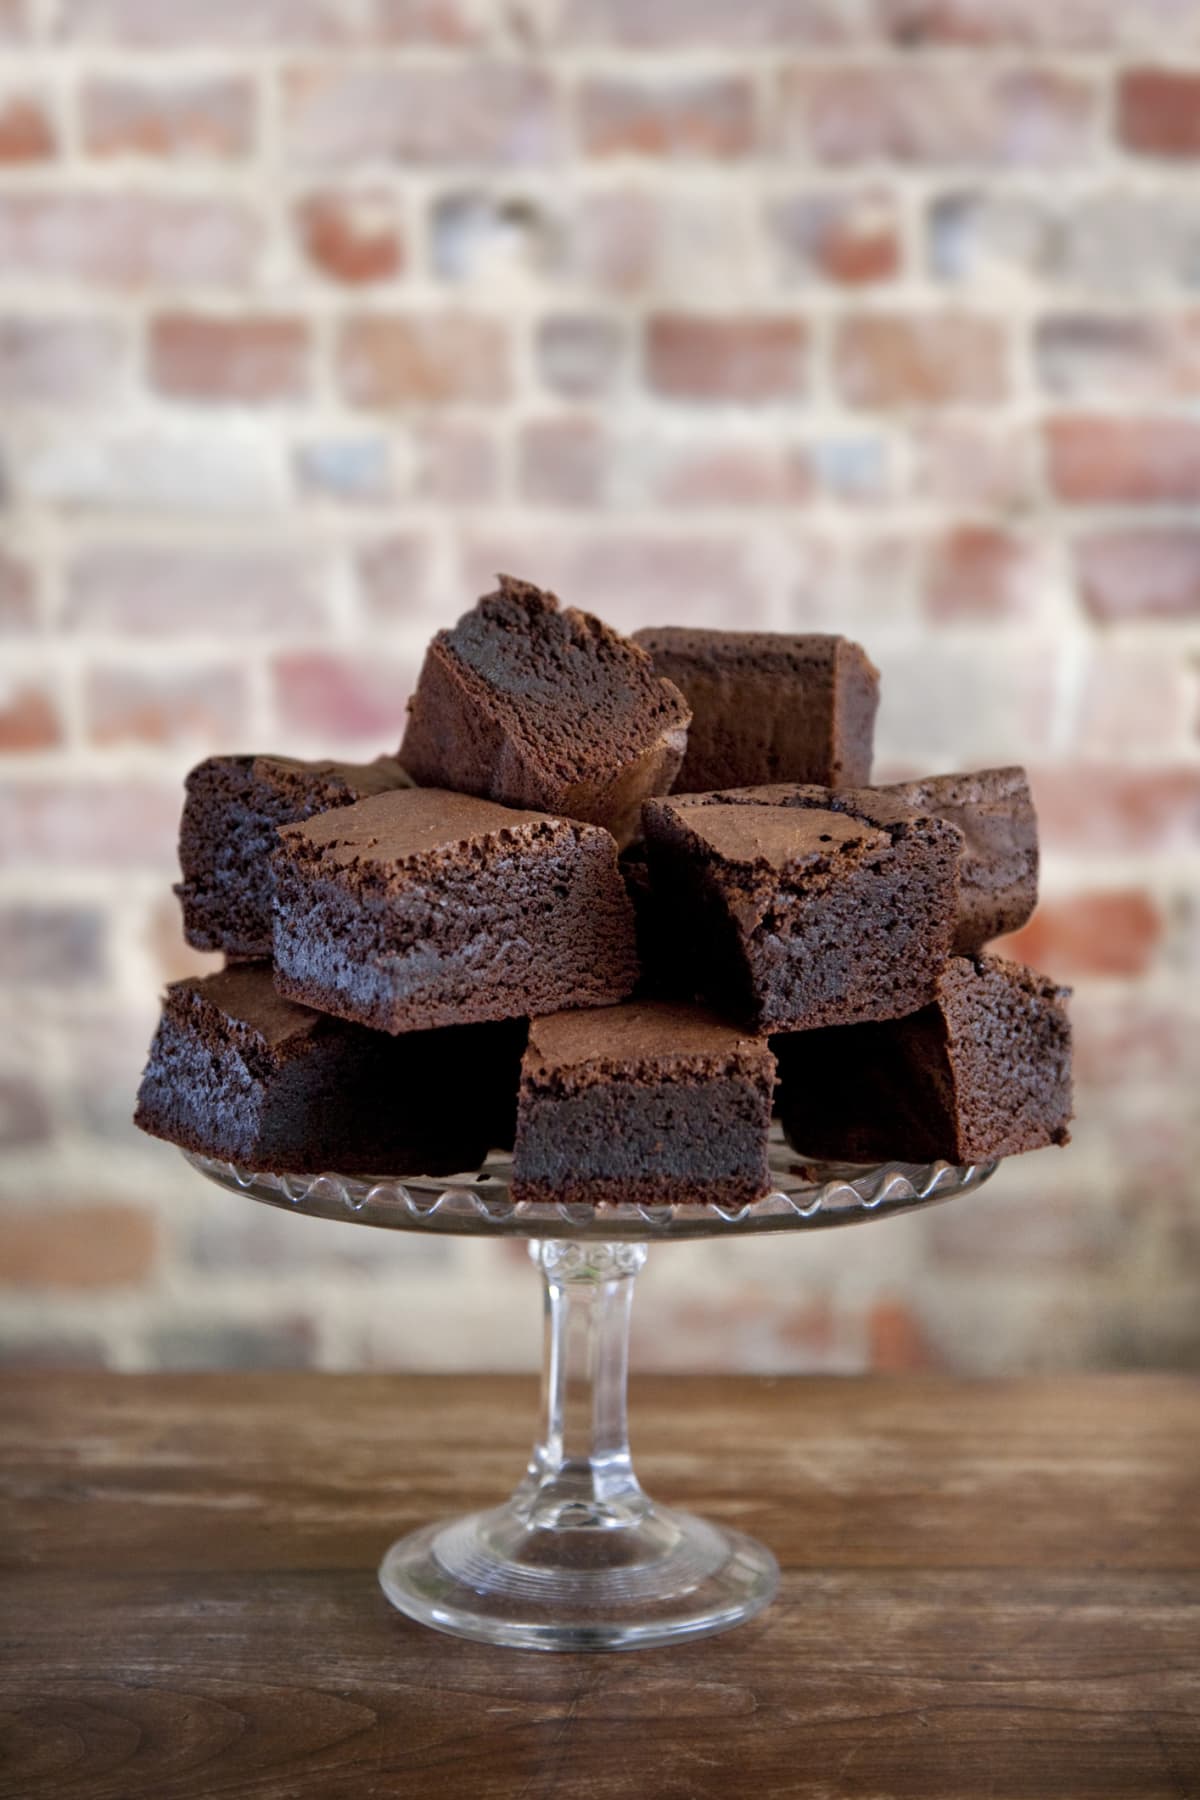 Several sliced brownies piled on top of a glass cake stand